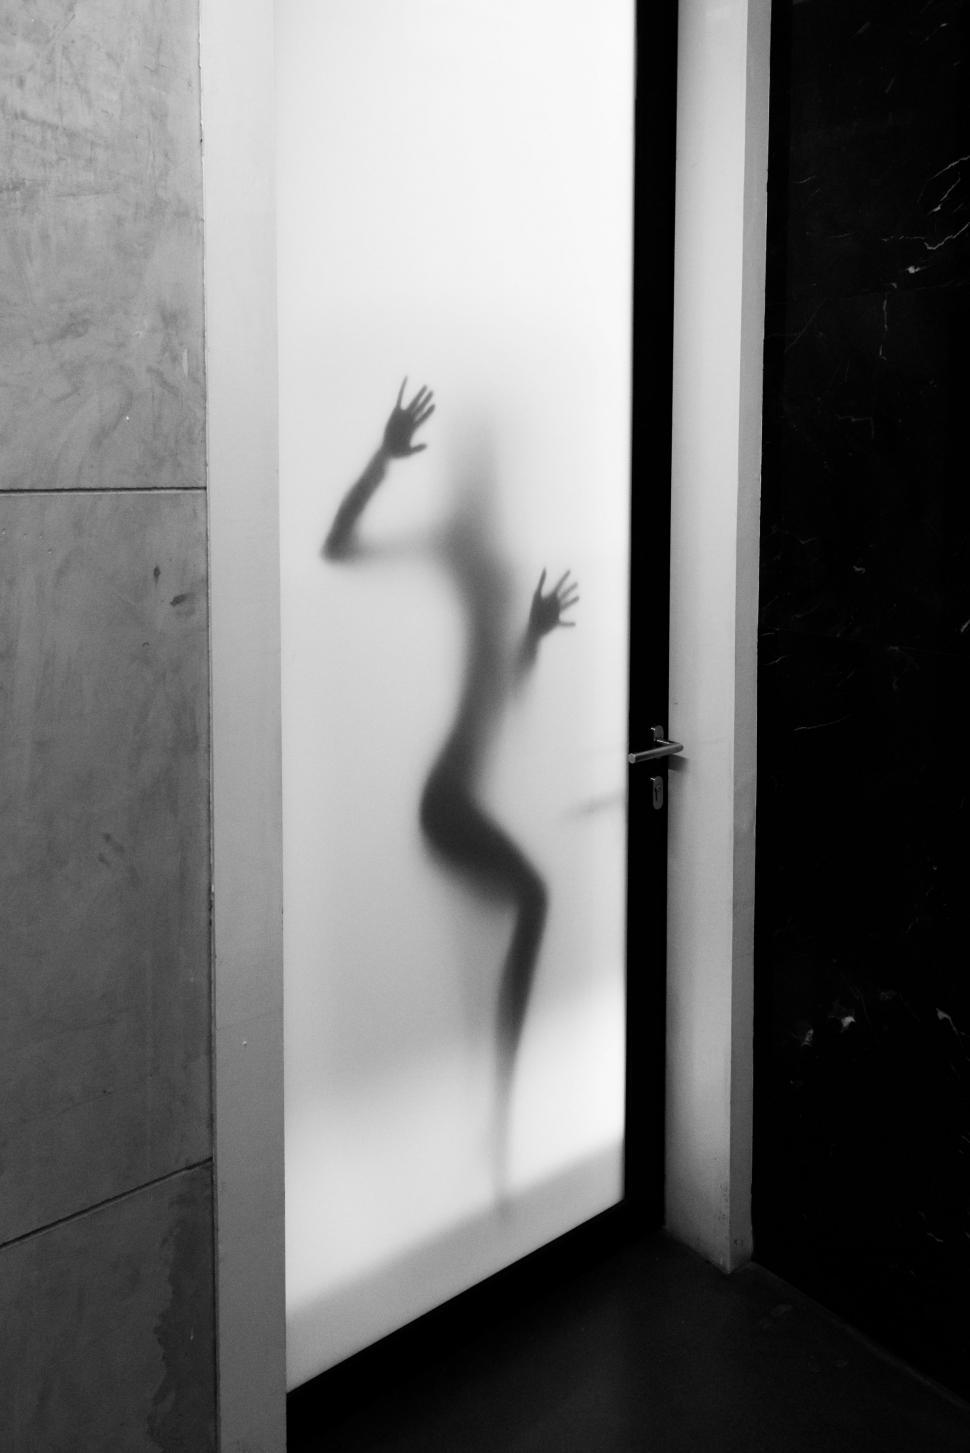 Free Image of Persons Shadow Standing in Shower 